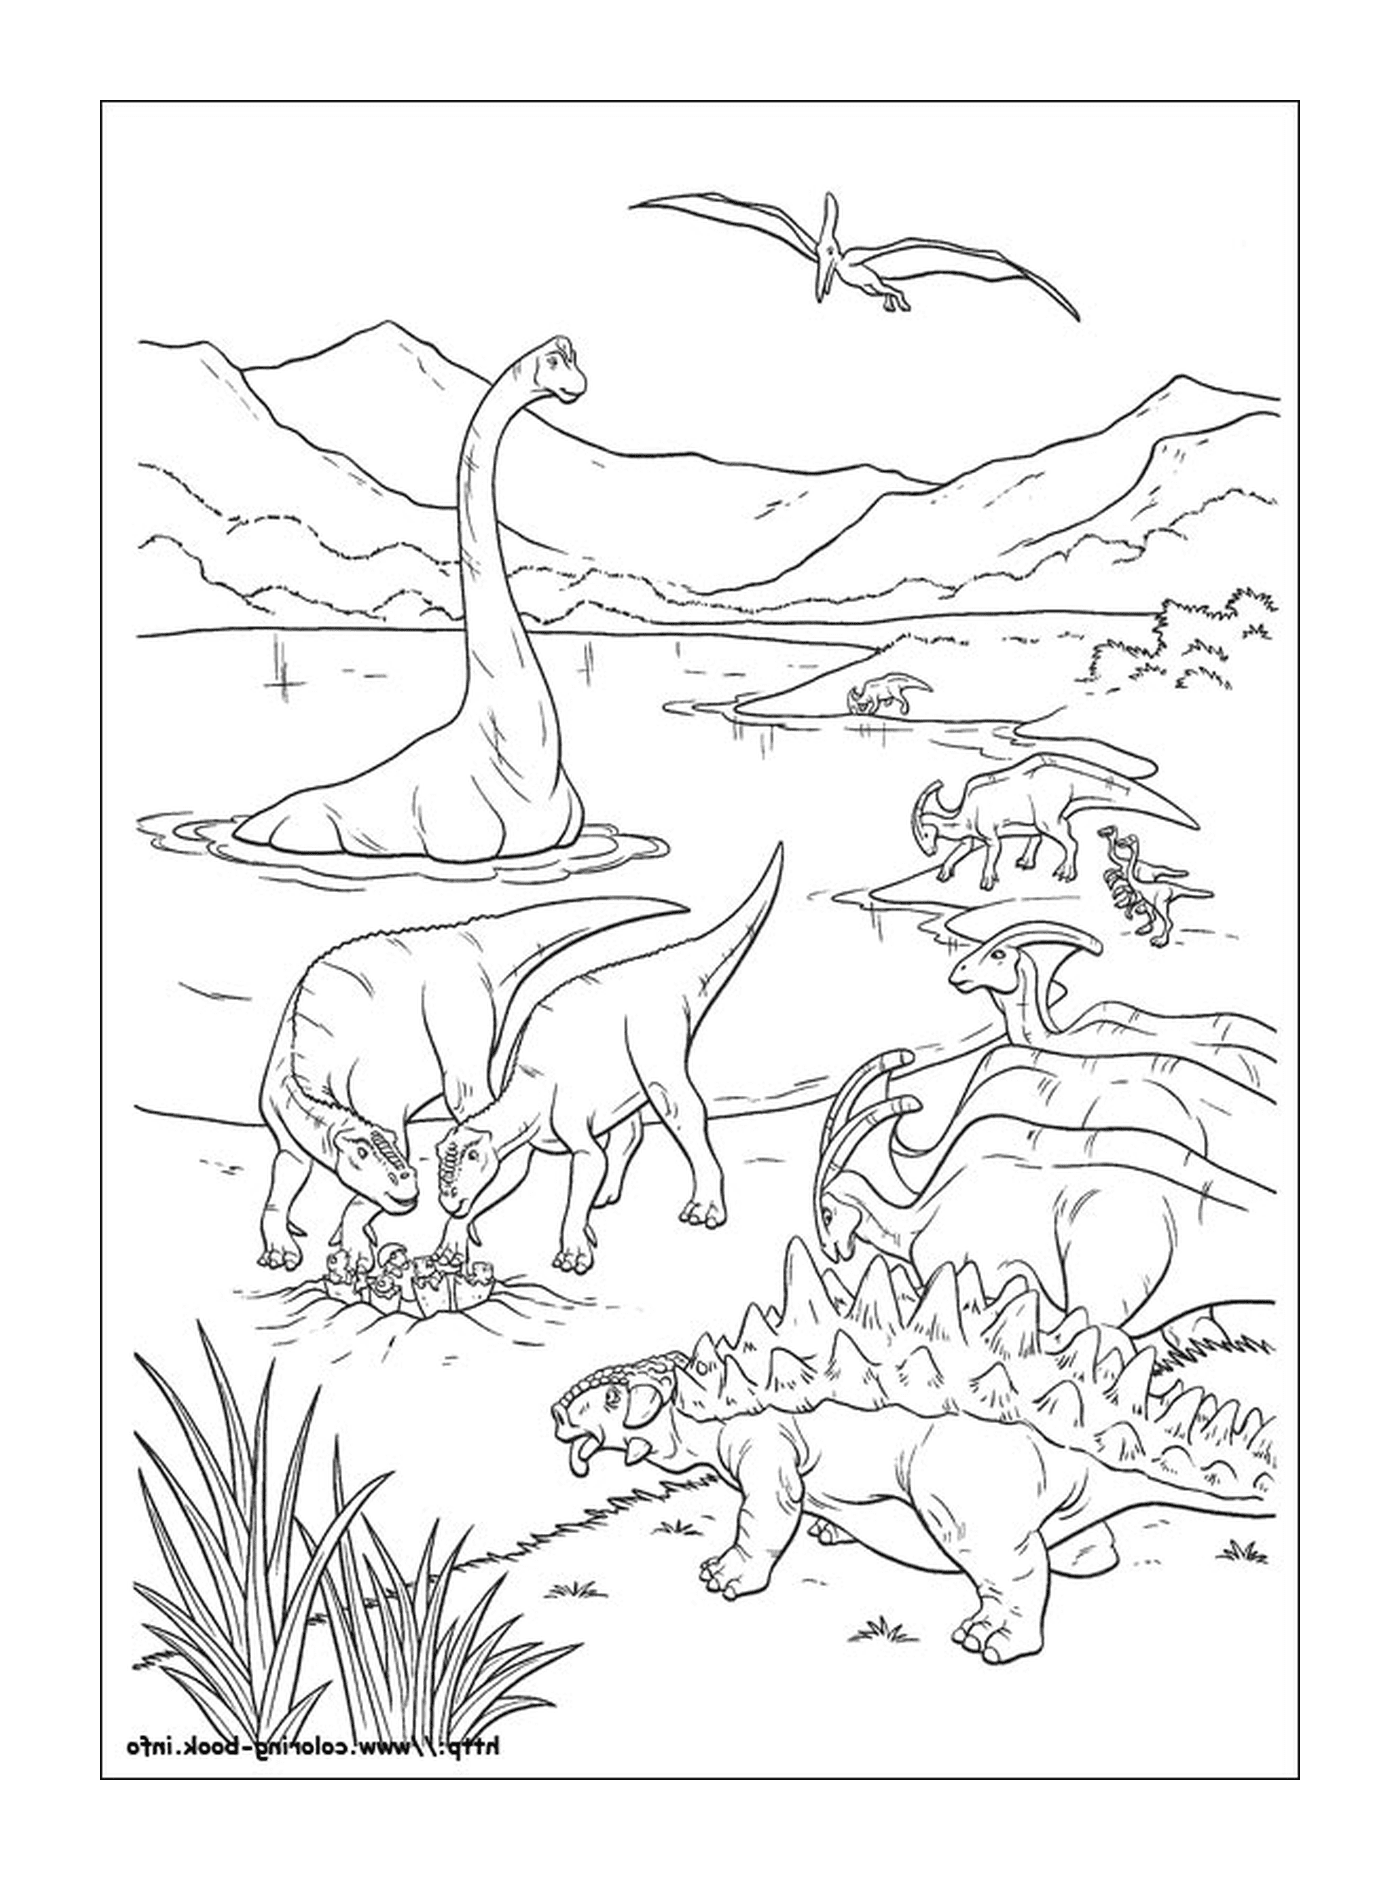  A group of dinosaurs in the water 